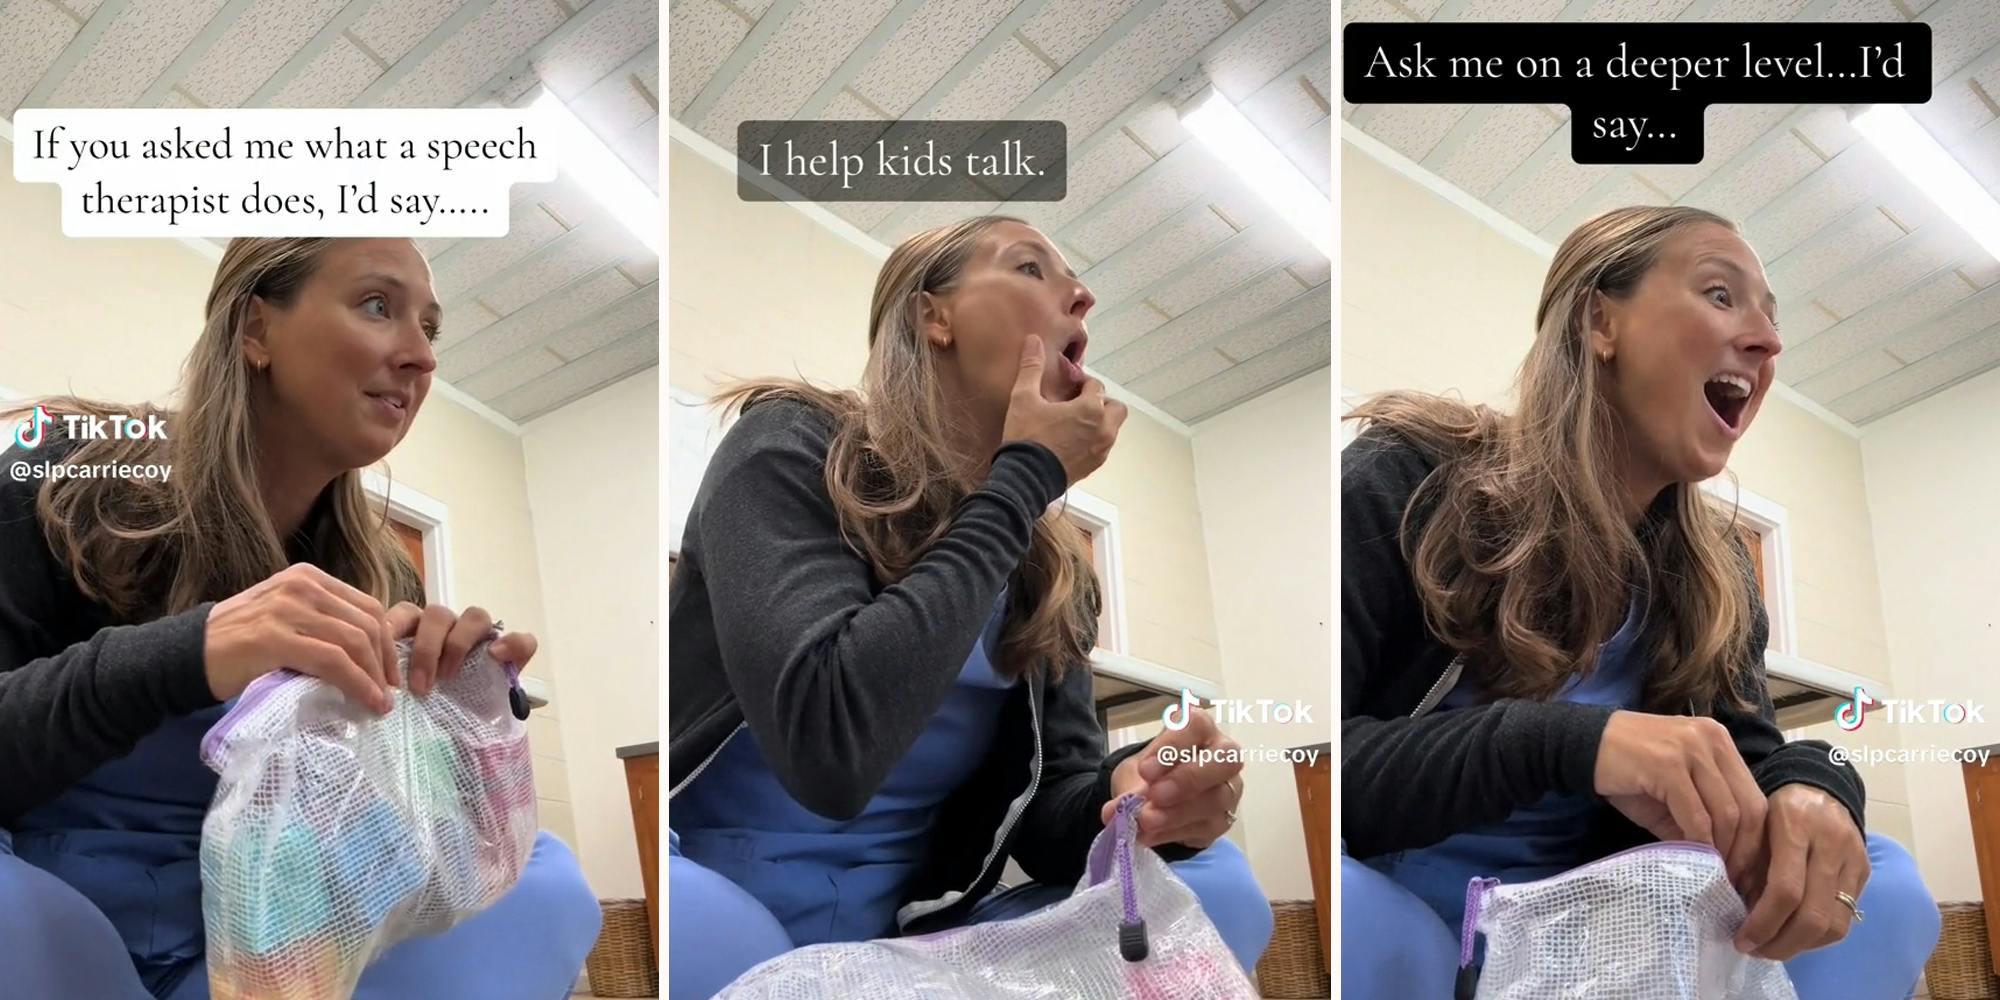 woman with bag of items with caption "if you asked me what a speech therapist does, I'd say....." (l) "I help kids talk." (c) "Ask me on a deeper level...I'd say..." (r)